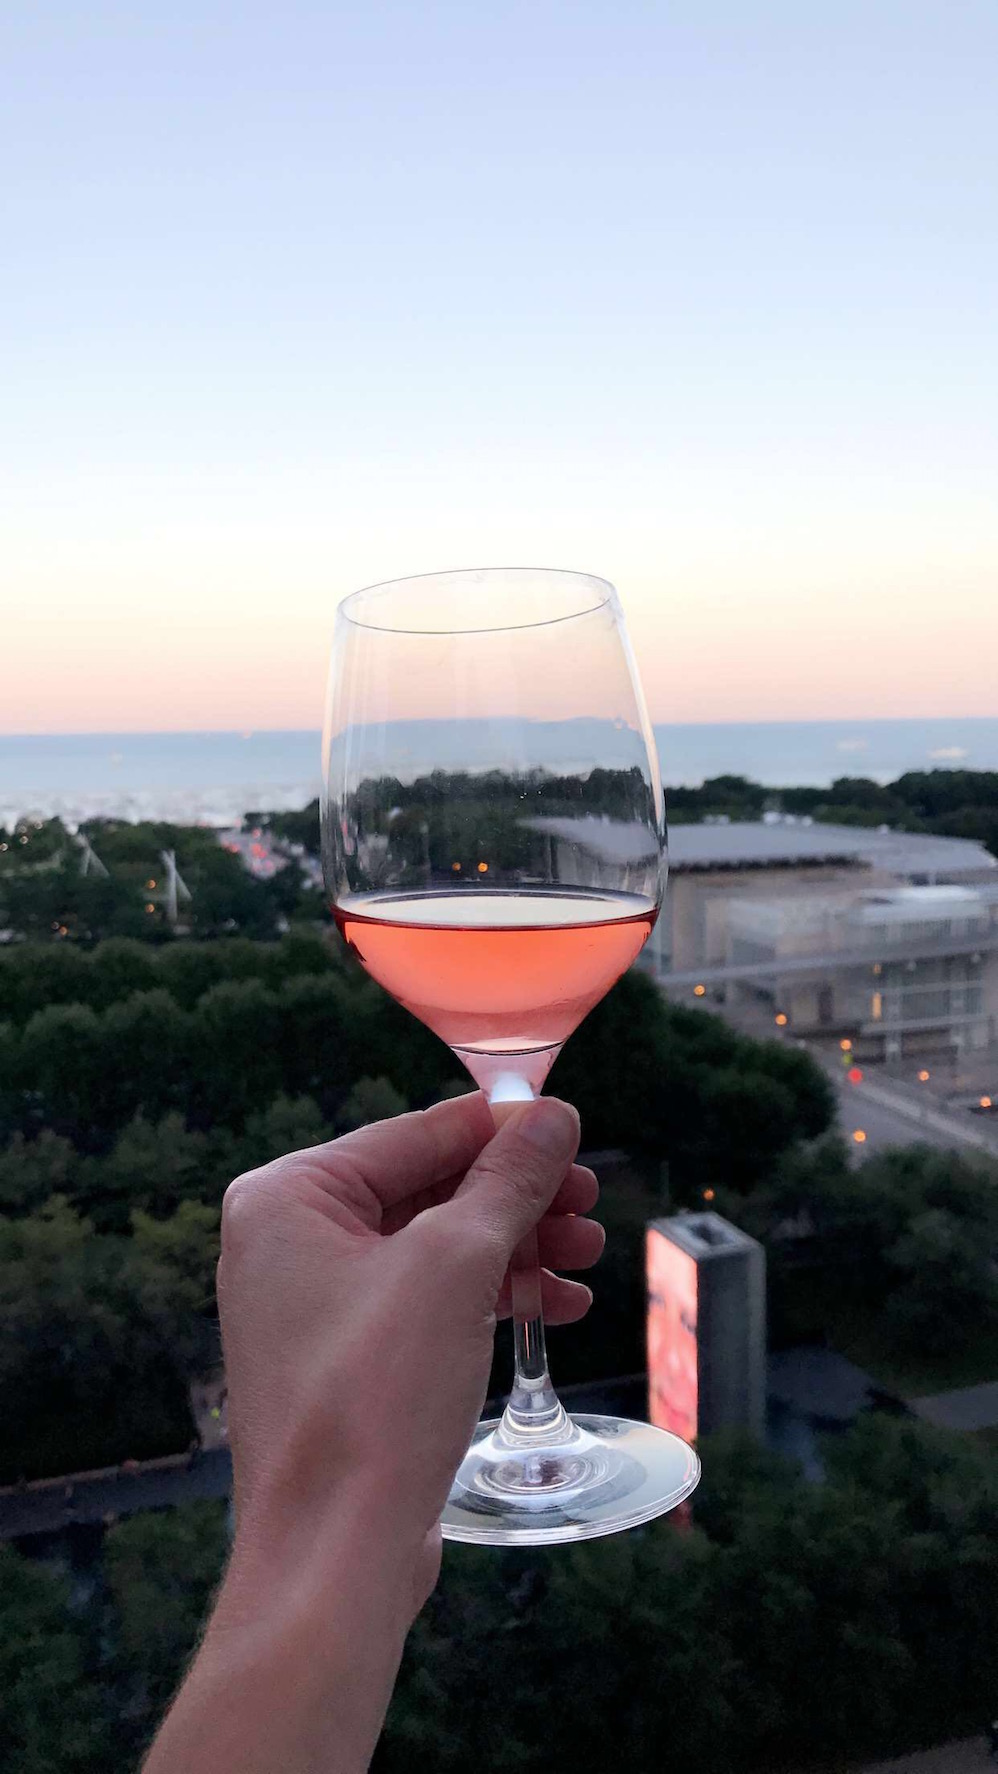 rosé all day (and night)